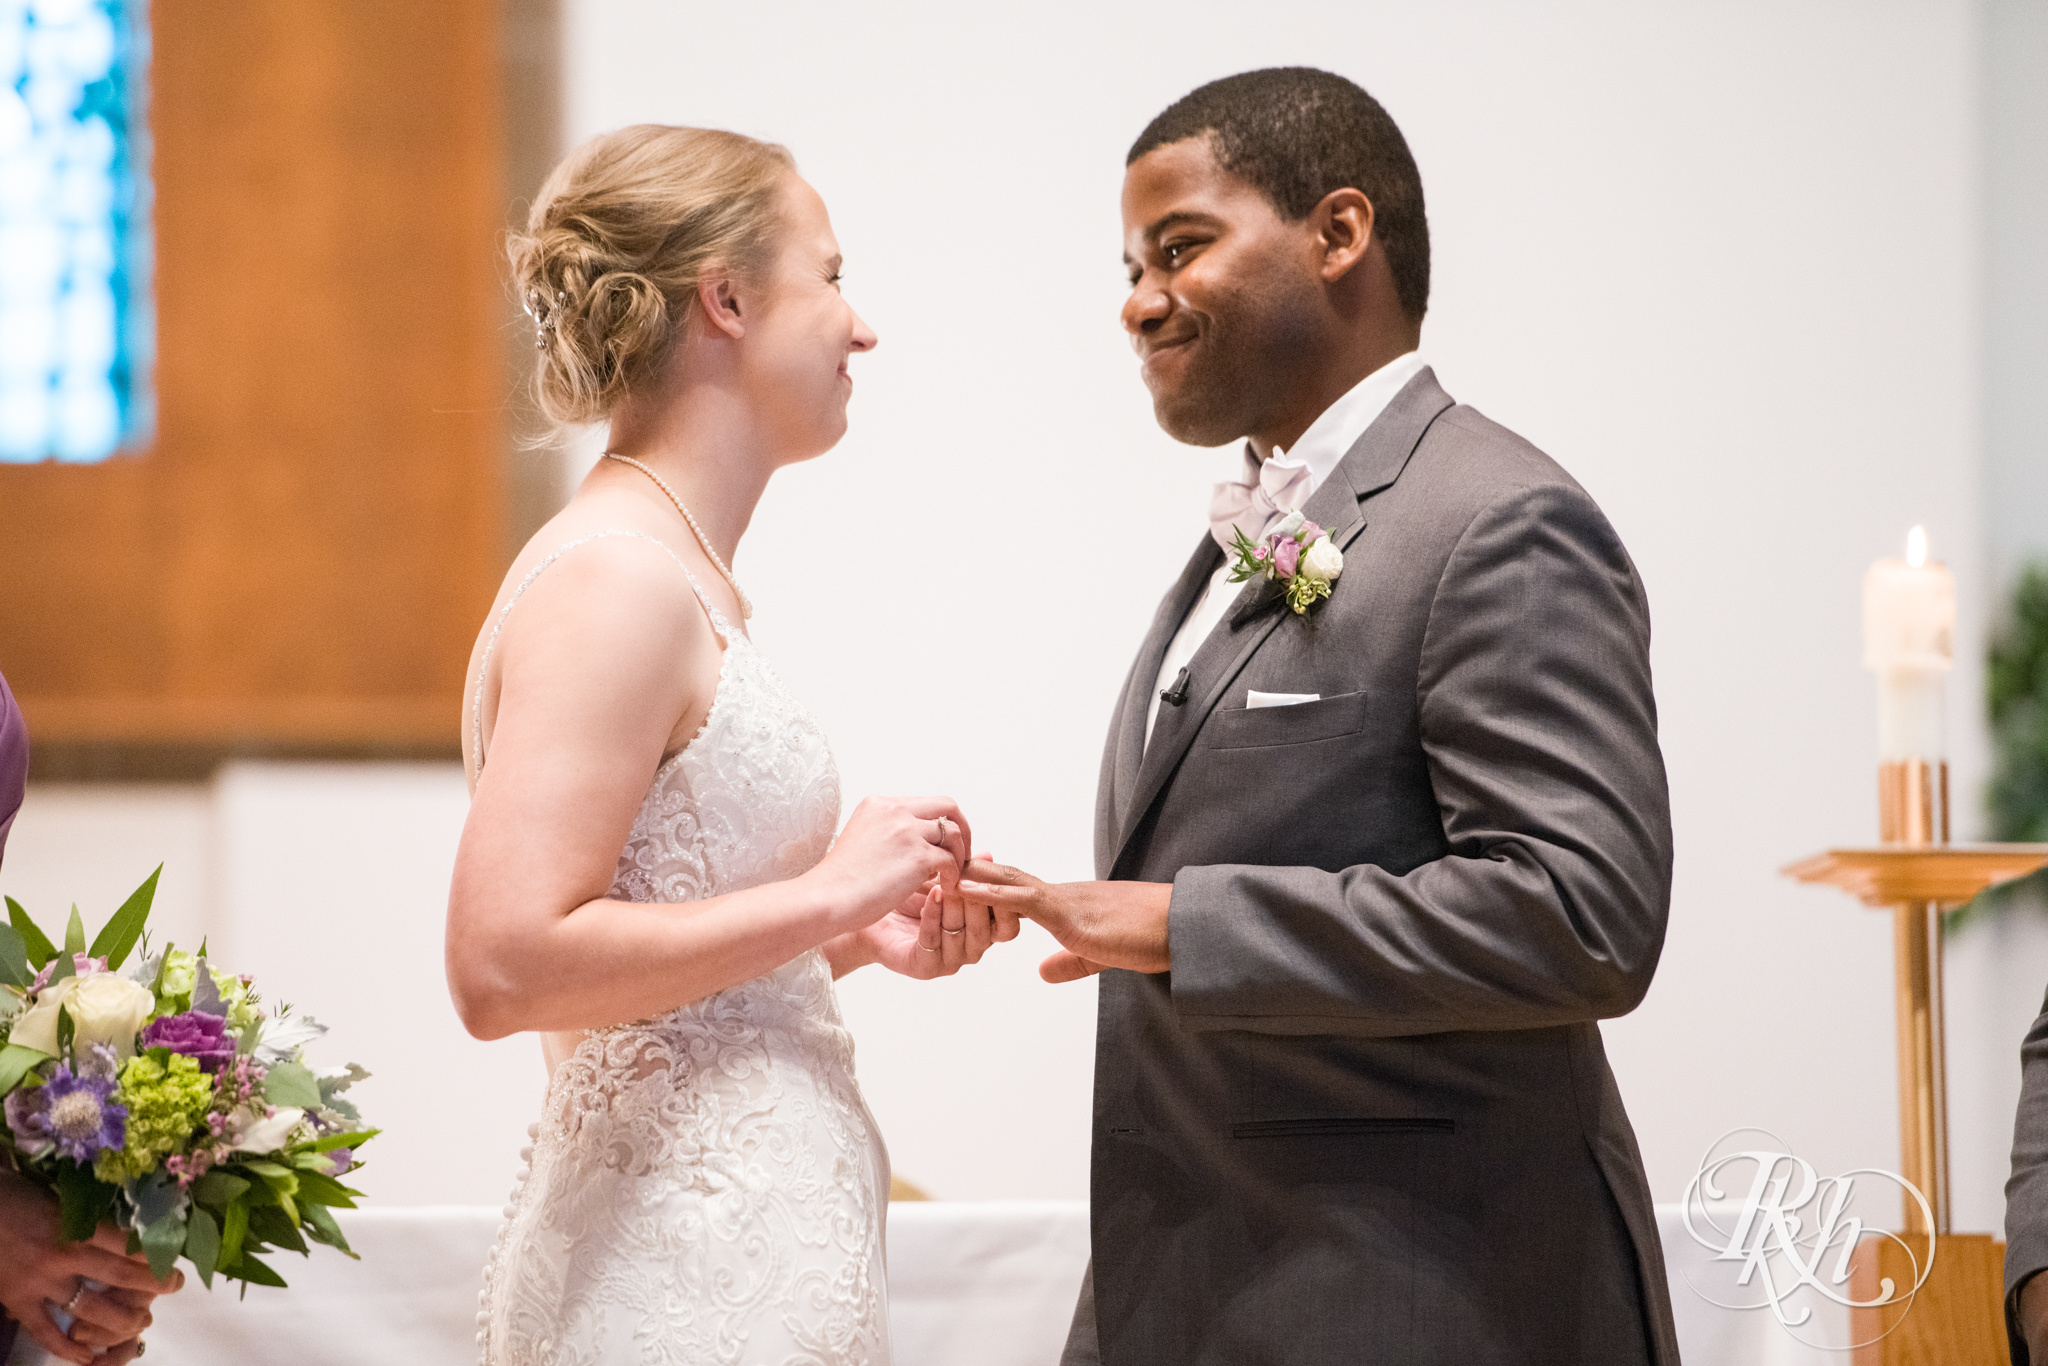 Black groom and white bride exchange rings during wedding ceremony at church in Richfield, Minnesota.